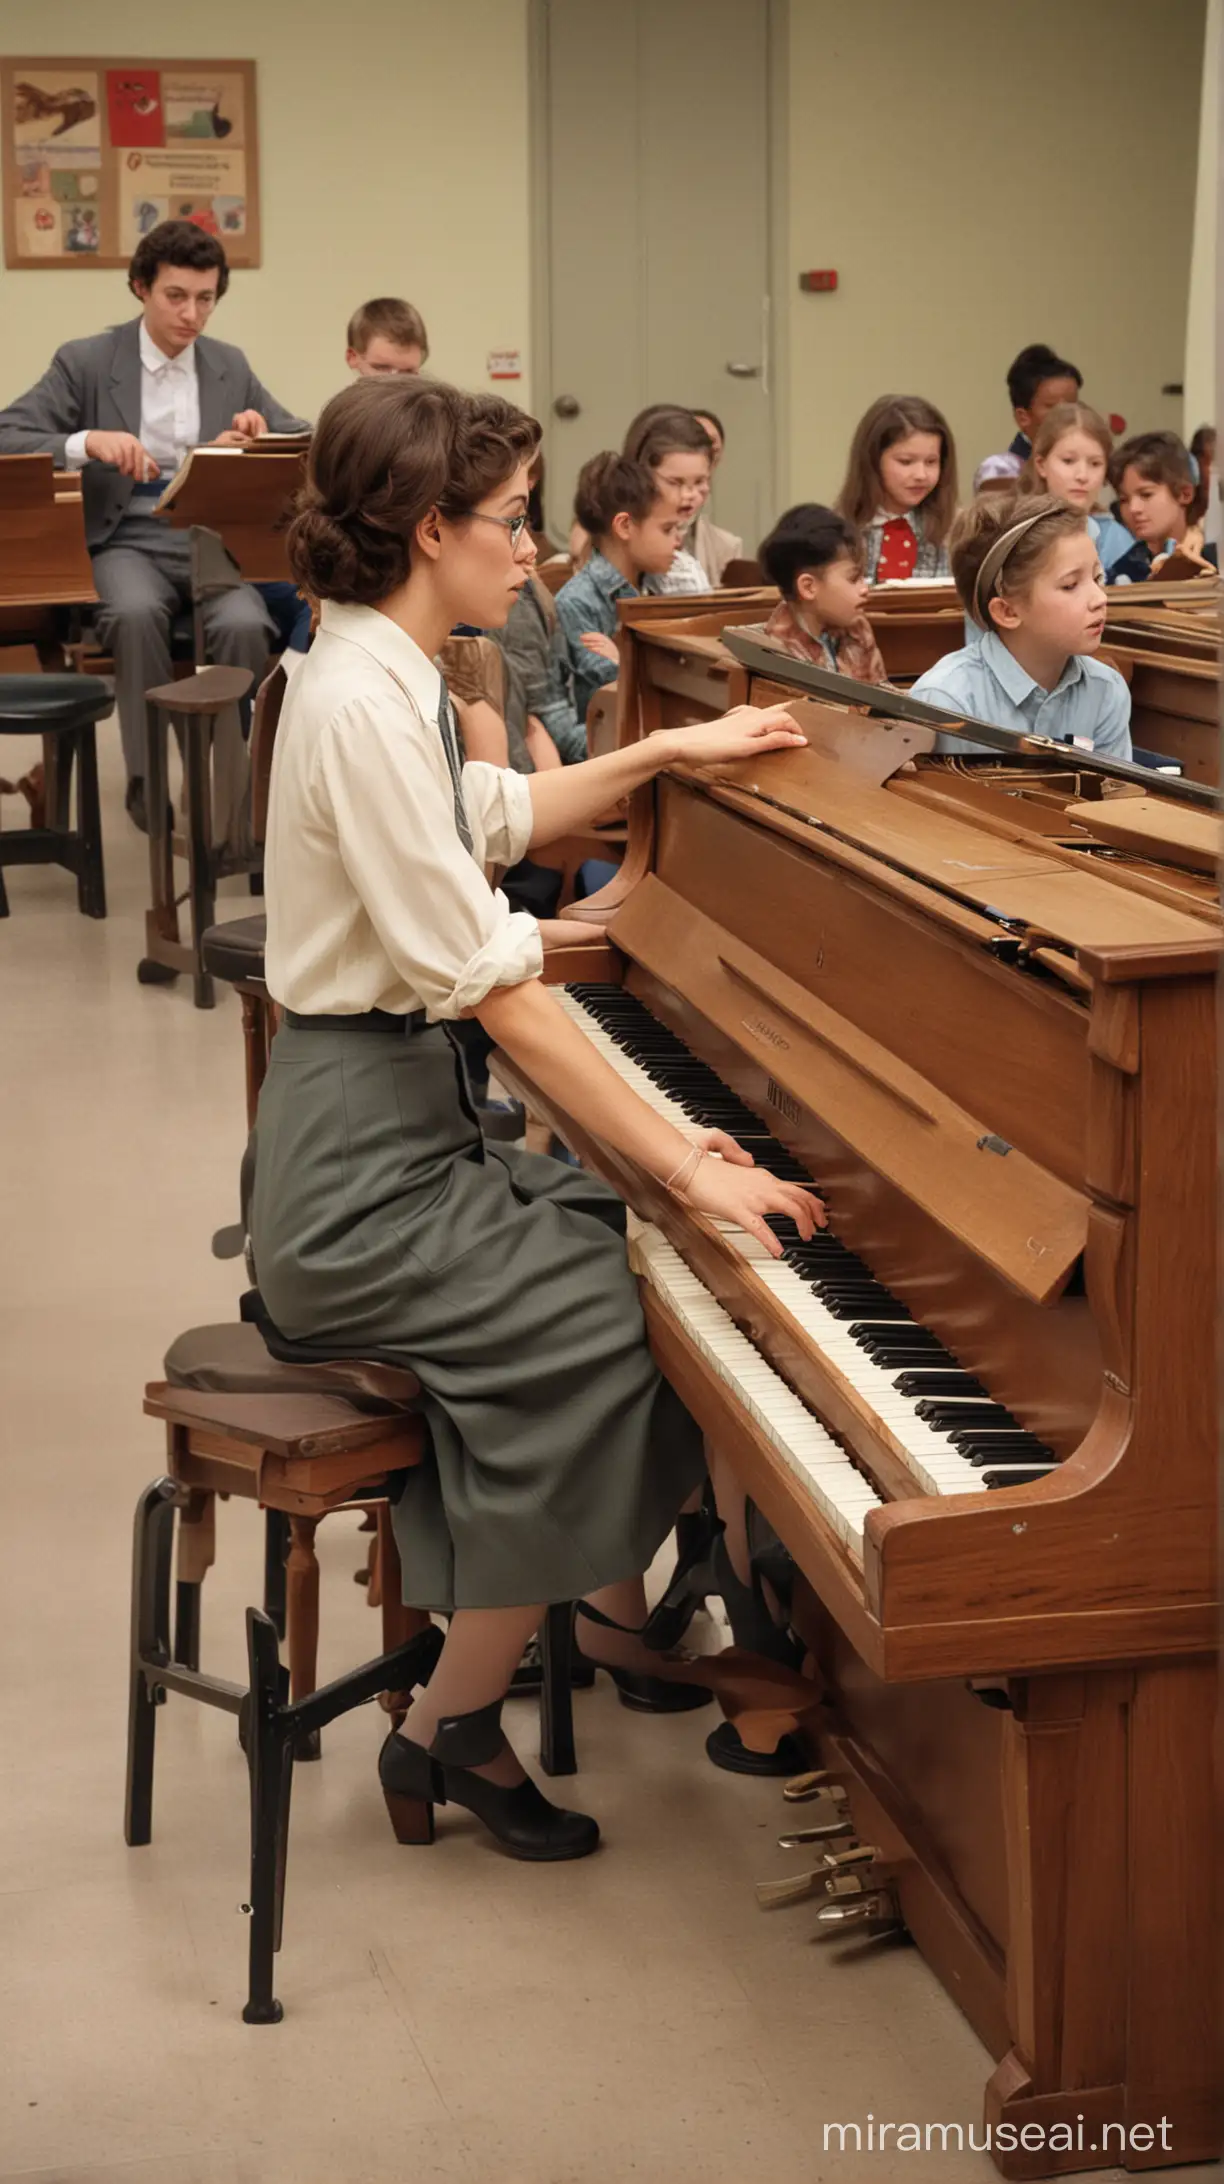 Woman teaching music to a classroom of students at a public school circa 1965. The teacher is seated on a piano bench and  playing  a natural wood color upright piano. She is facing us. Our view is from behind the students.  The students are seated on the floor in 4 rows with their back to us. The teacher has two arms. In the Style of Norman Rockwell   